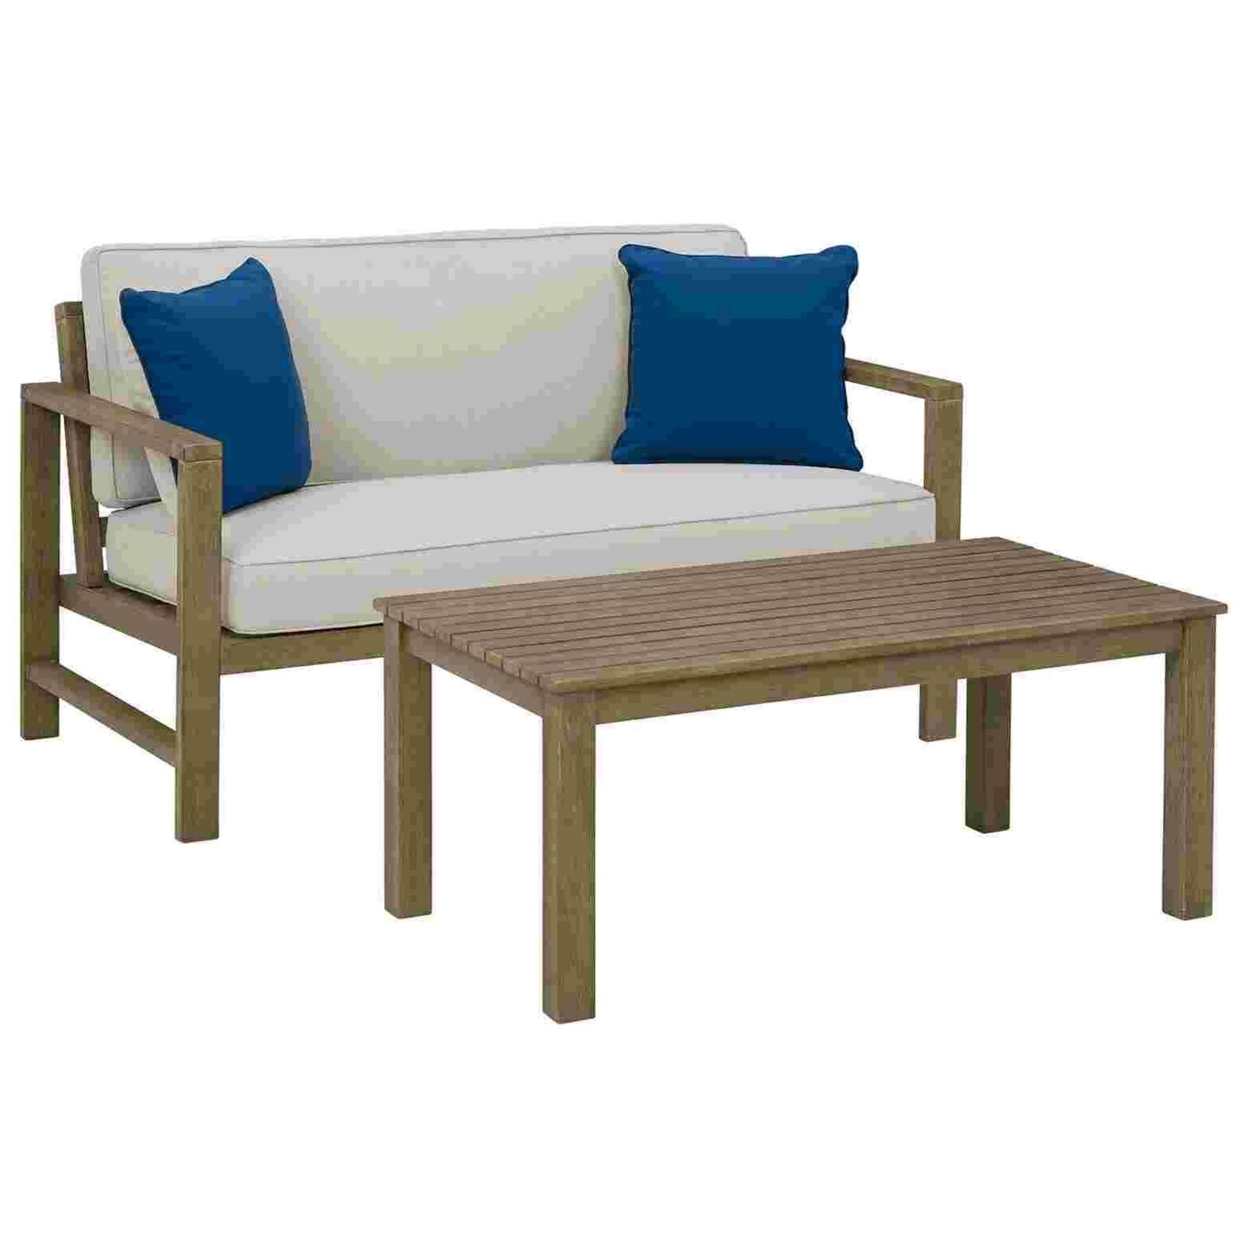 2 Piece Outdoor Loveseat And Table With Fabric Cushions, Brown- Saltoro Sherpi